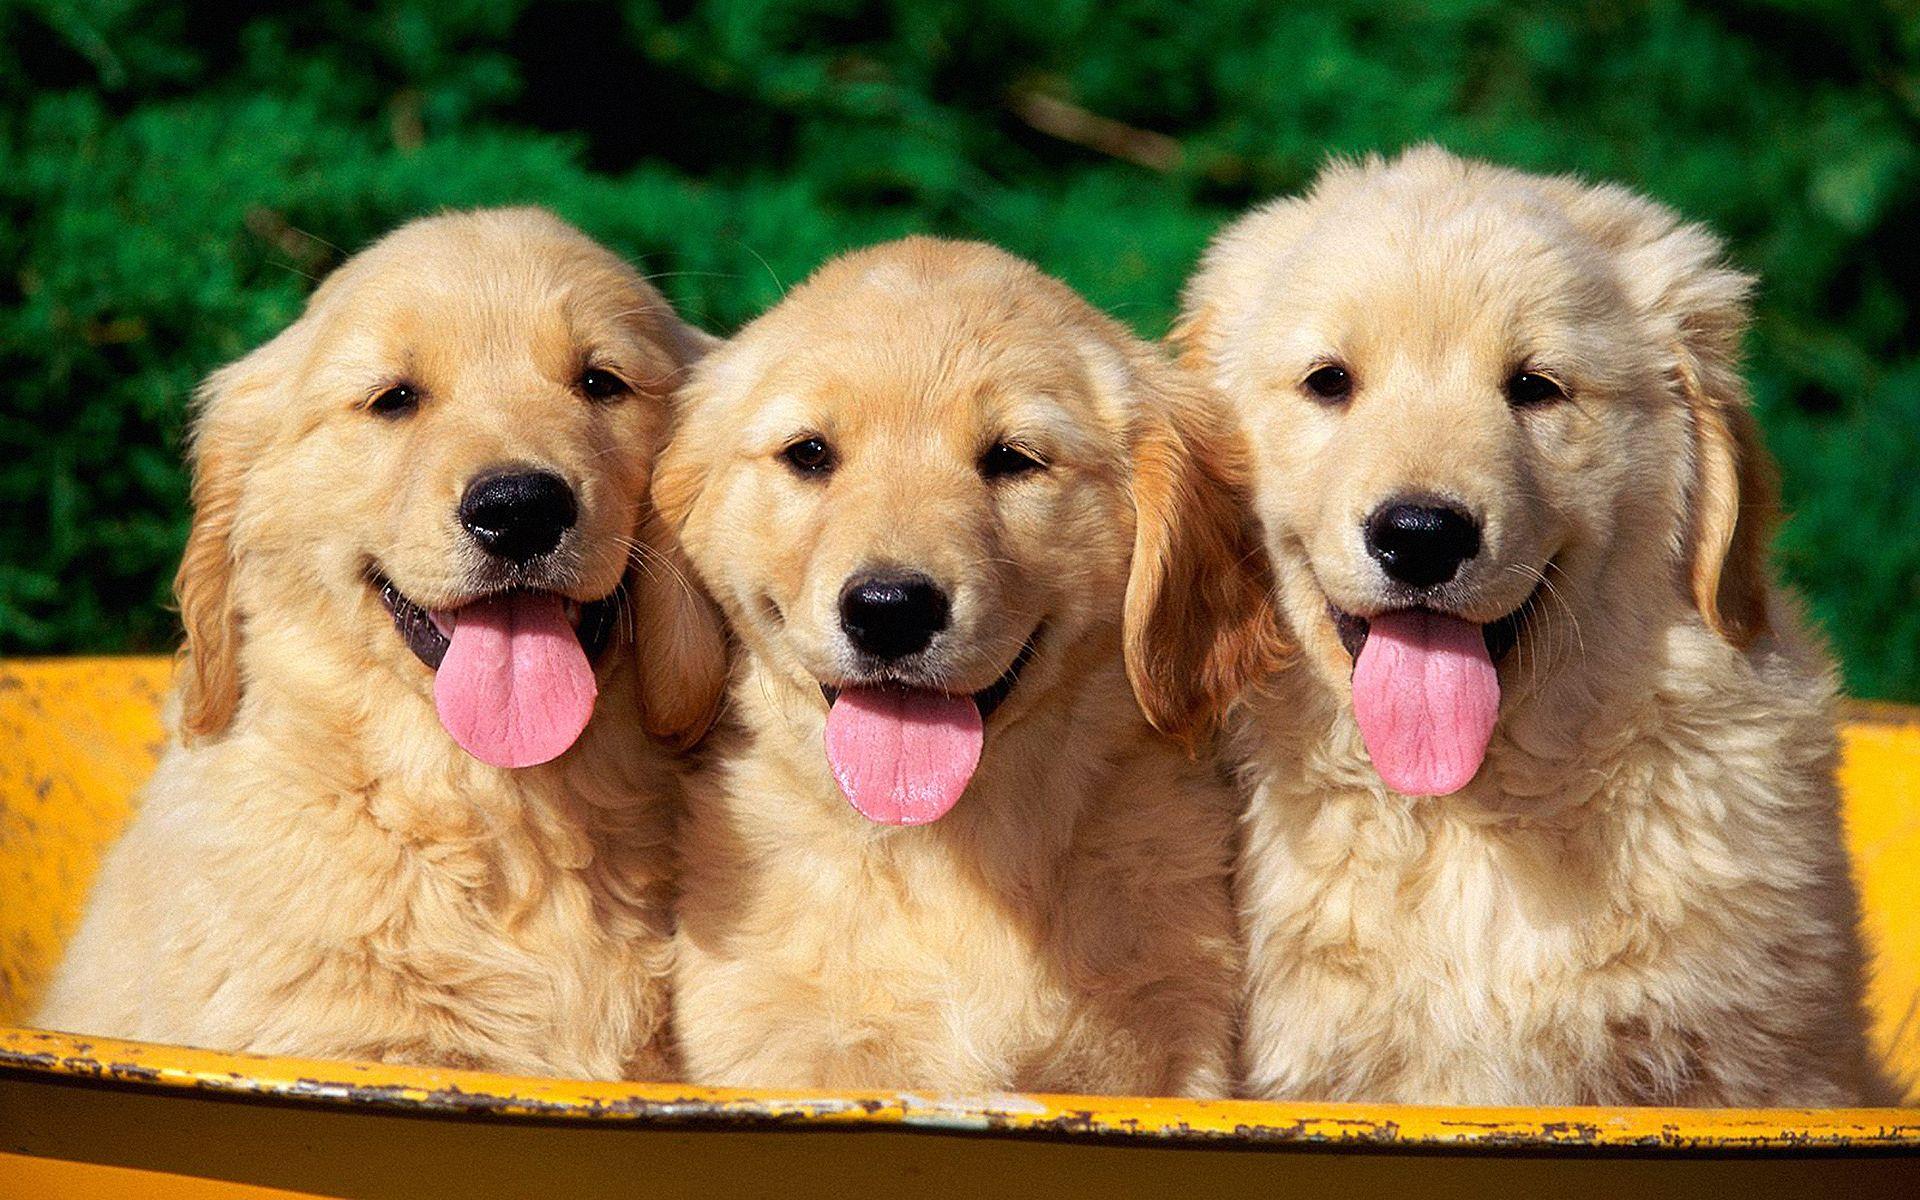 Golden Retriever puppies in the basket photo and wallpaper